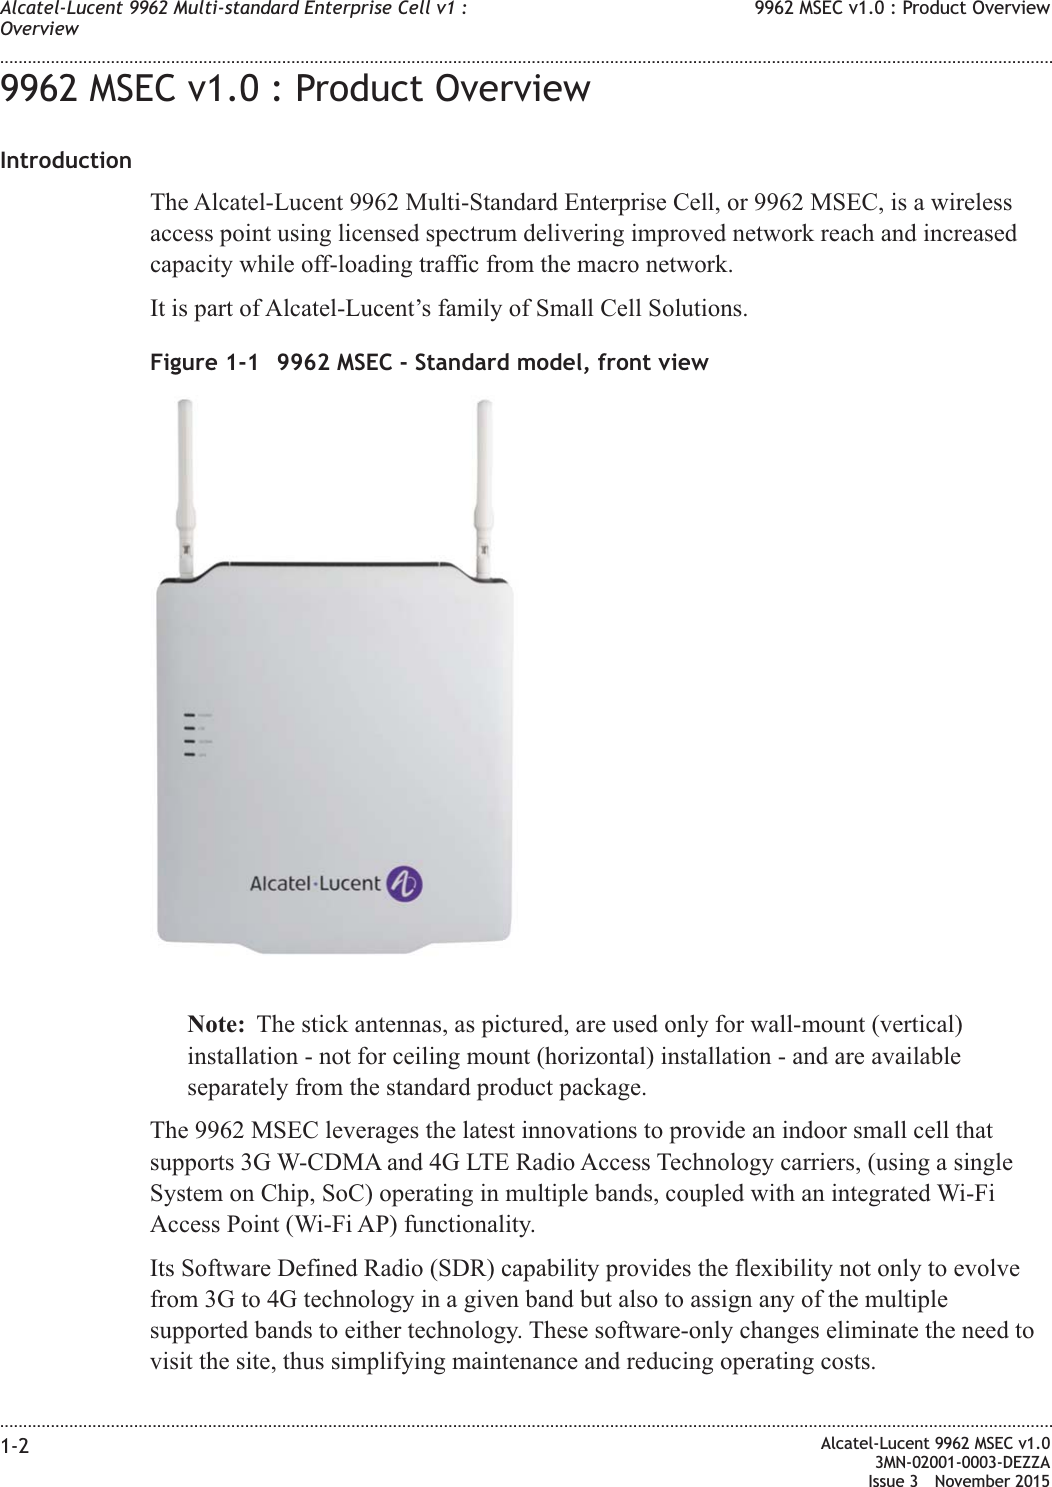 9962 MSEC v1.0 : Product OverviewIntroductionThe Alcatel-Lucent 9962 Multi-Standard Enterprise Cell, or 9962 MSEC, is a wirelessaccess point using licensed spectrum delivering improved network reach and increasedcapacity while off-loading traffic from the macro network.It is part of Alcatel-Lucent’s family of Small Cell Solutions.Note: The stick antennas, as pictured, are used only for wall-mount (vertical)installation - not for ceiling mount (horizontal) installation - and are availableseparately from the standard product package.The 9962 MSEC leverages the latest innovations to provide an indoor small cell thatsupports 3G W-CDMA and 4G LTE Radio Access Technology carriers, (using a singleSystem on Chip, SoC) operating in multiple bands, coupled with an integrated Wi-FiAccess Point (Wi-Fi AP) functionality.Its Software Defined Radio (SDR) capability provides the flexibility not only to evolvefrom 3G to 4G technology in a given band but also to assign any of the multiplesupported bands to either technology. These software-only changes eliminate the need tovisit the site, thus simplifying maintenance and reducing operating costs.Figure 1-1 9962 MSEC - Standard model, front viewAlcatel-Lucent 9962 Multi-standard Enterprise Cell v1 :Overview9962 MSEC v1.0 : Product Overview........................................................................................................................................................................................................................................................................................................................................................................................................................................................................1-2 Alcatel-Lucent 9962 MSEC v1.03MN-02001-0003-DEZZAIssue 3 November 2015